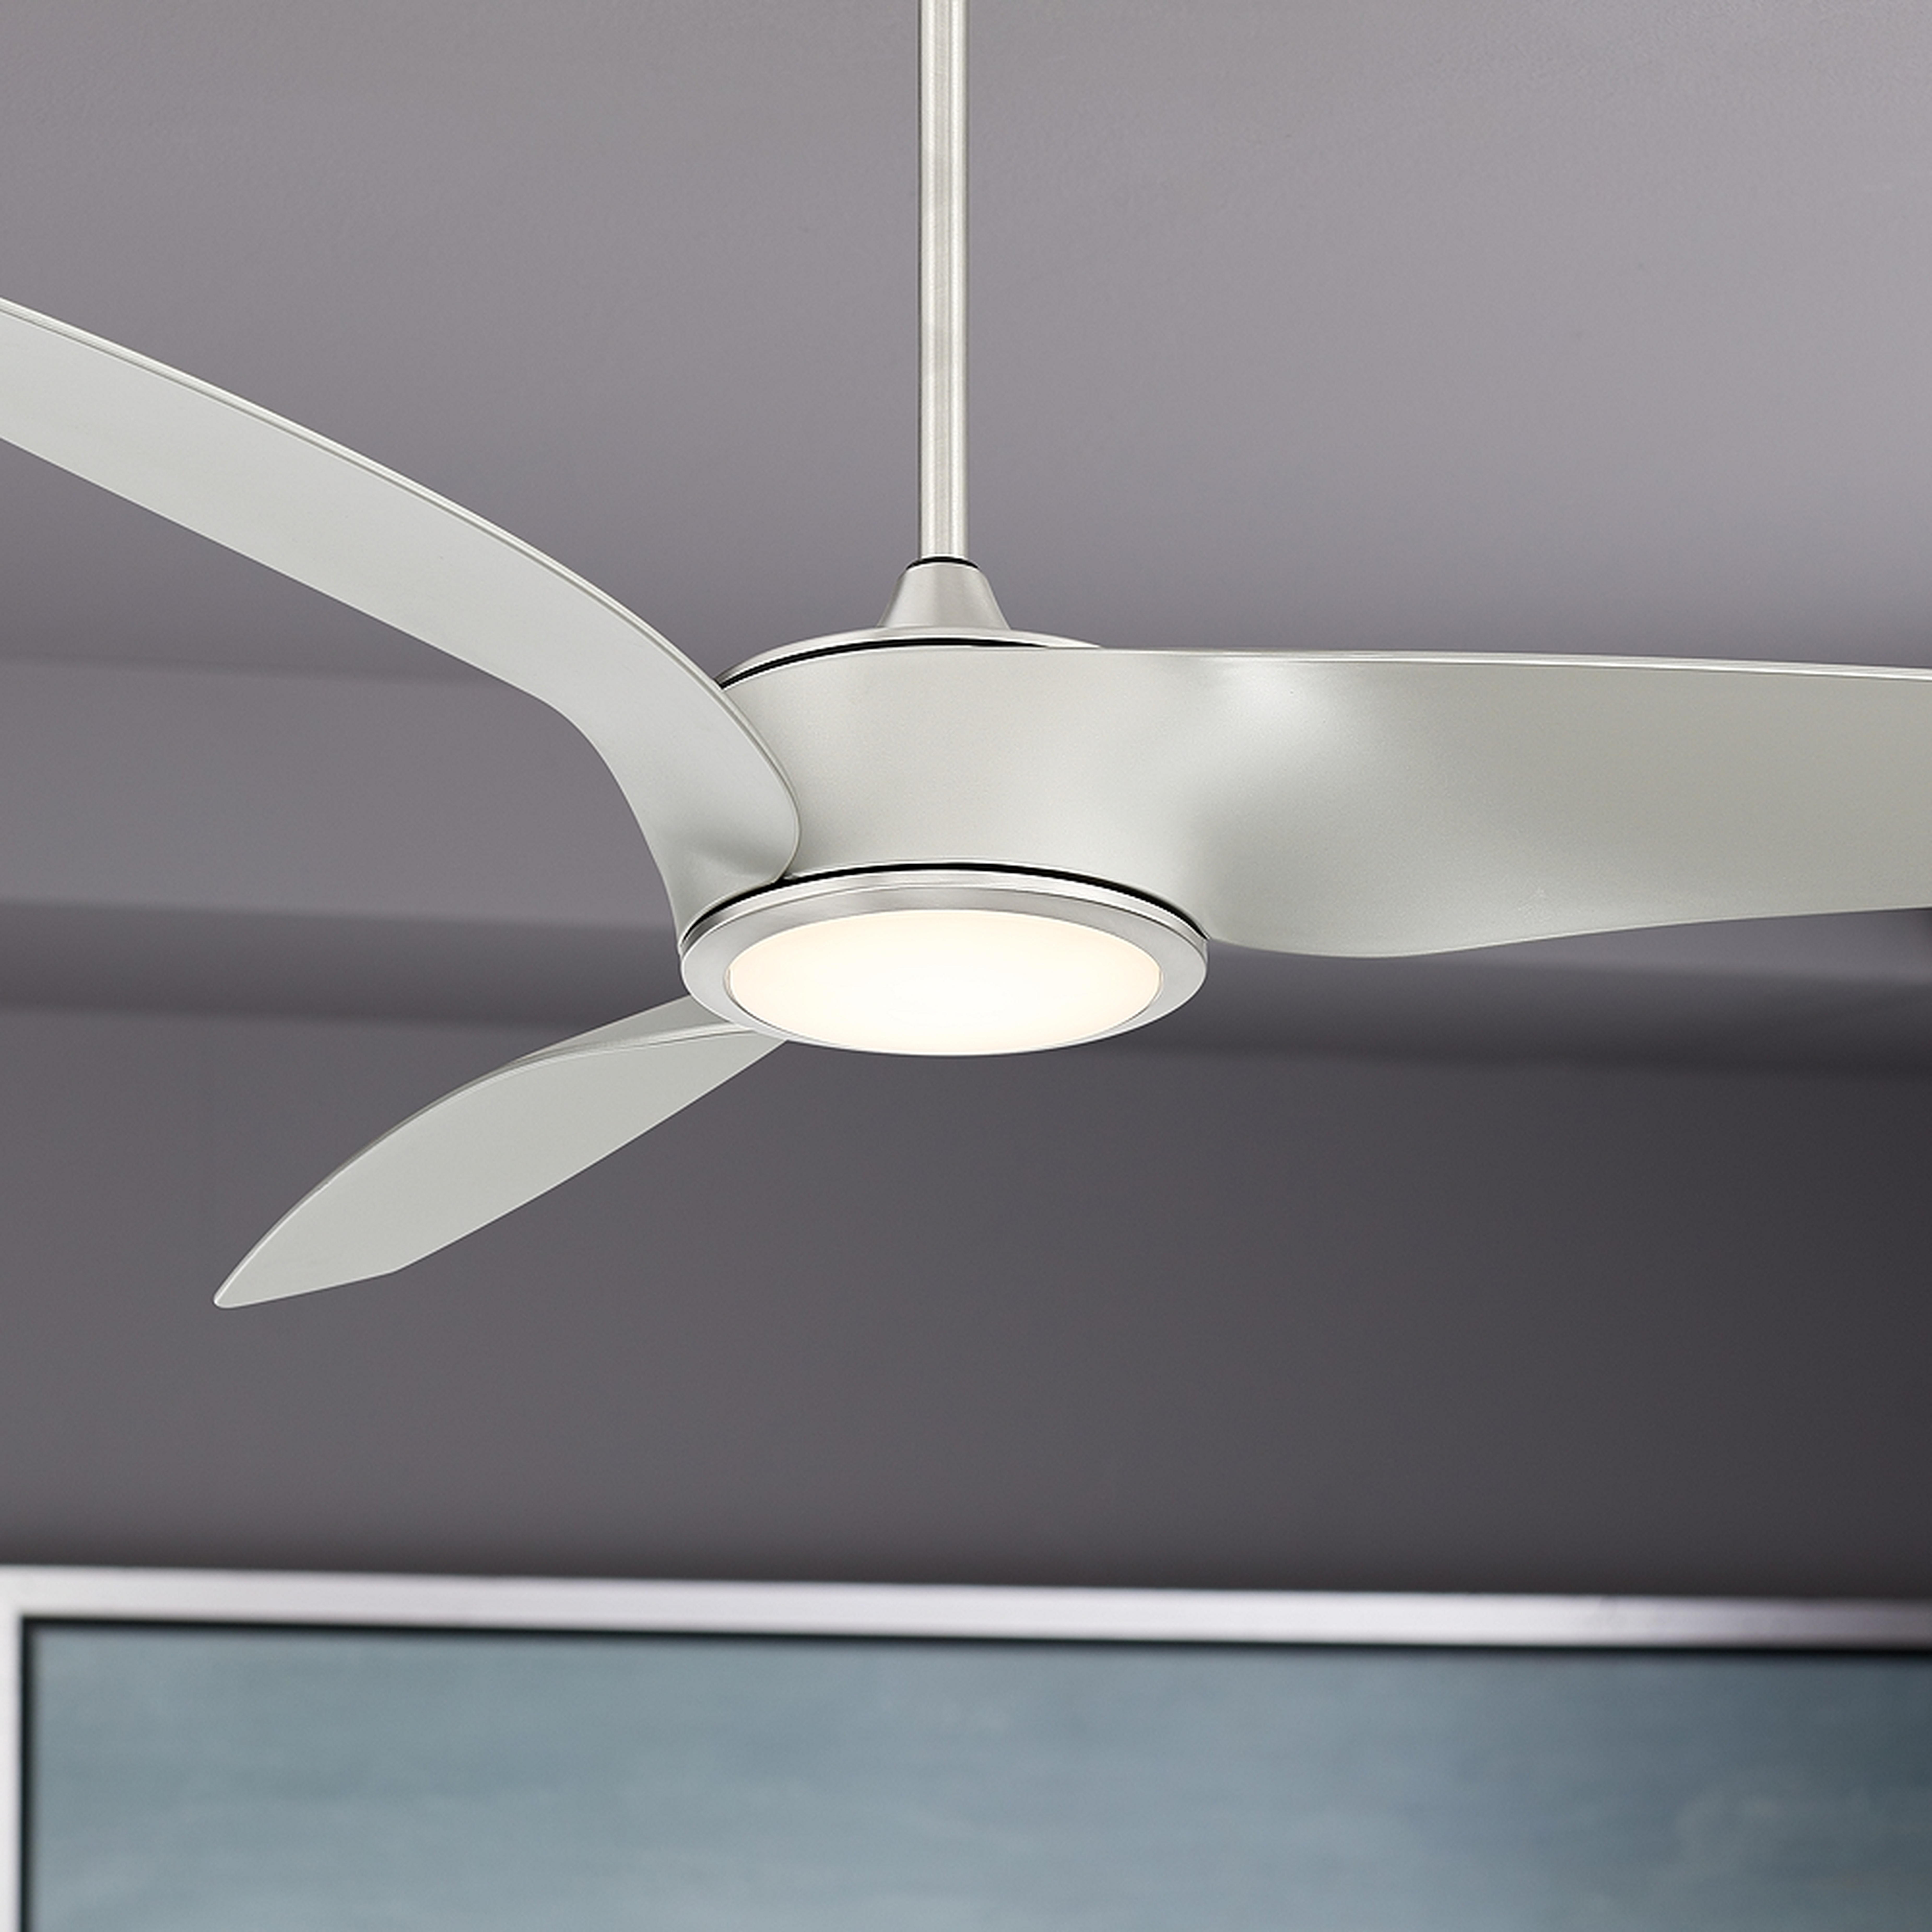 56" Casa Como Brushed Nickel LED Ceiling Fan - Style # 79D72 - Lamps Plus